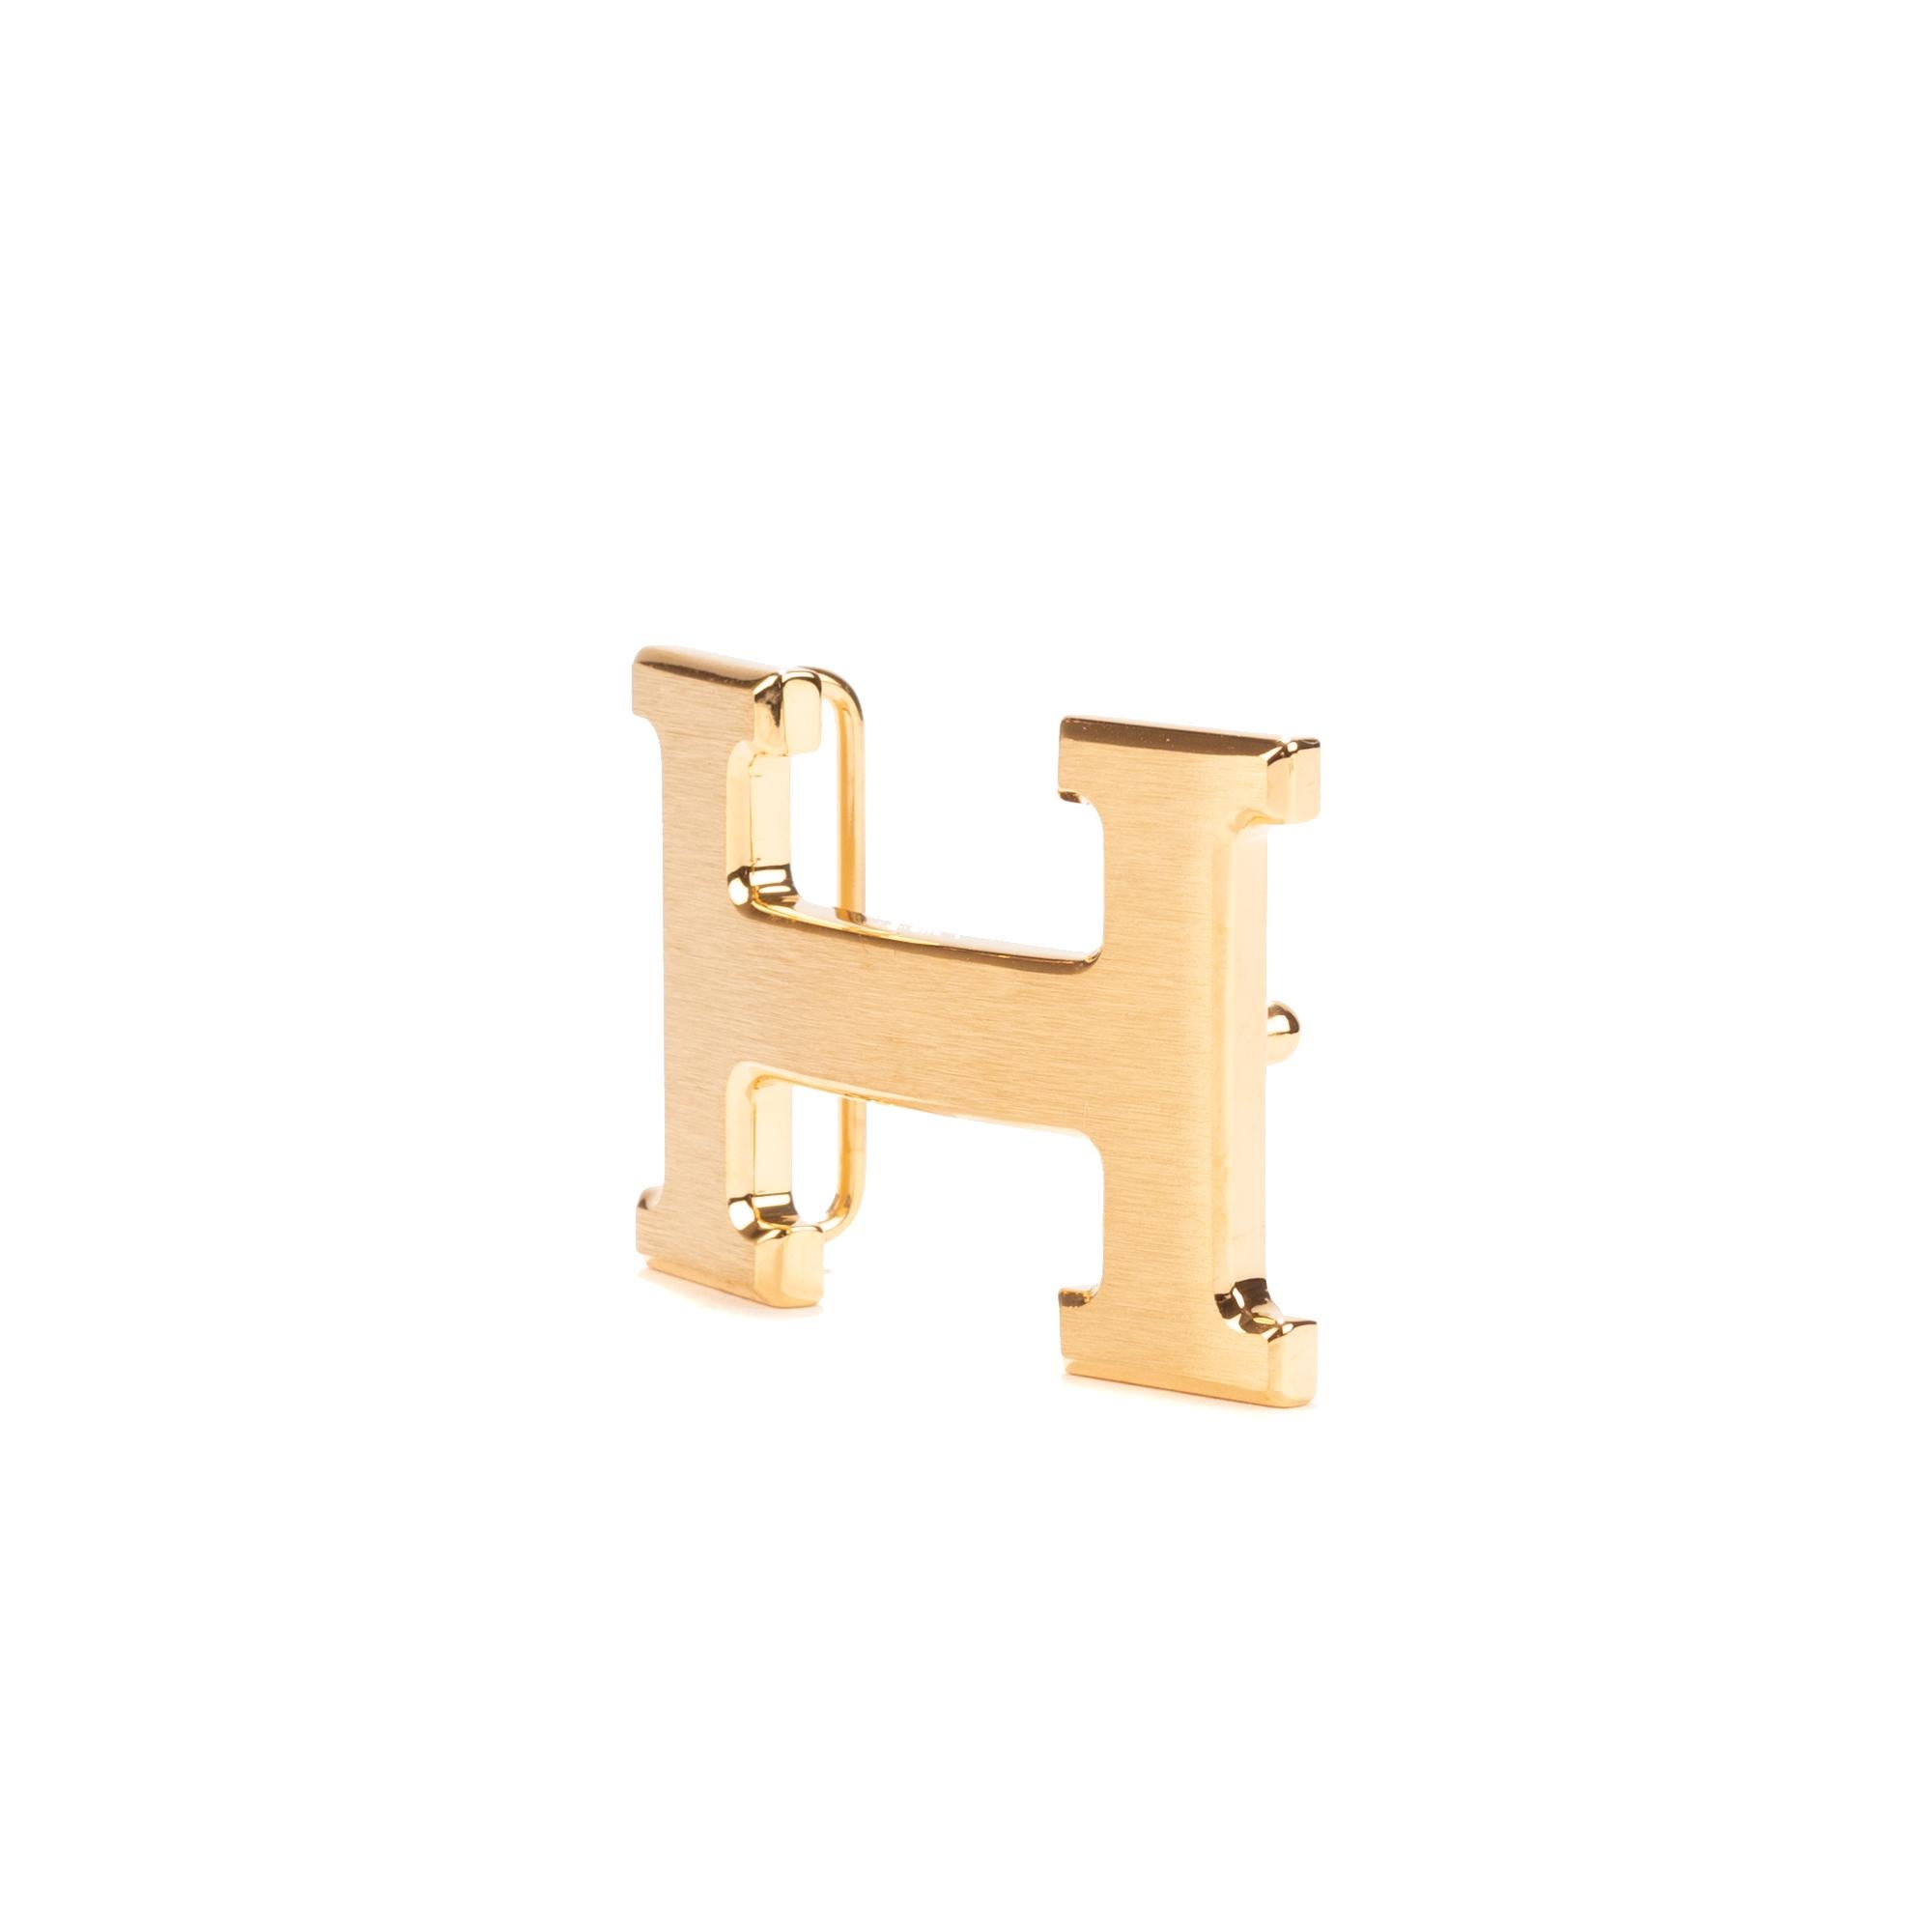 Type: Belt buckle
Brand: Hermès
Model: Constance in matt brushed gold metal
Material: matt steel
Colour: Gold
Signed HERMES on the tranche
Shape: H For 3.2 cm wide leather link (leather not provided) 
Dimensions: H: 3.7 x W: 6 x D: 1.4 cm (1,45 x 